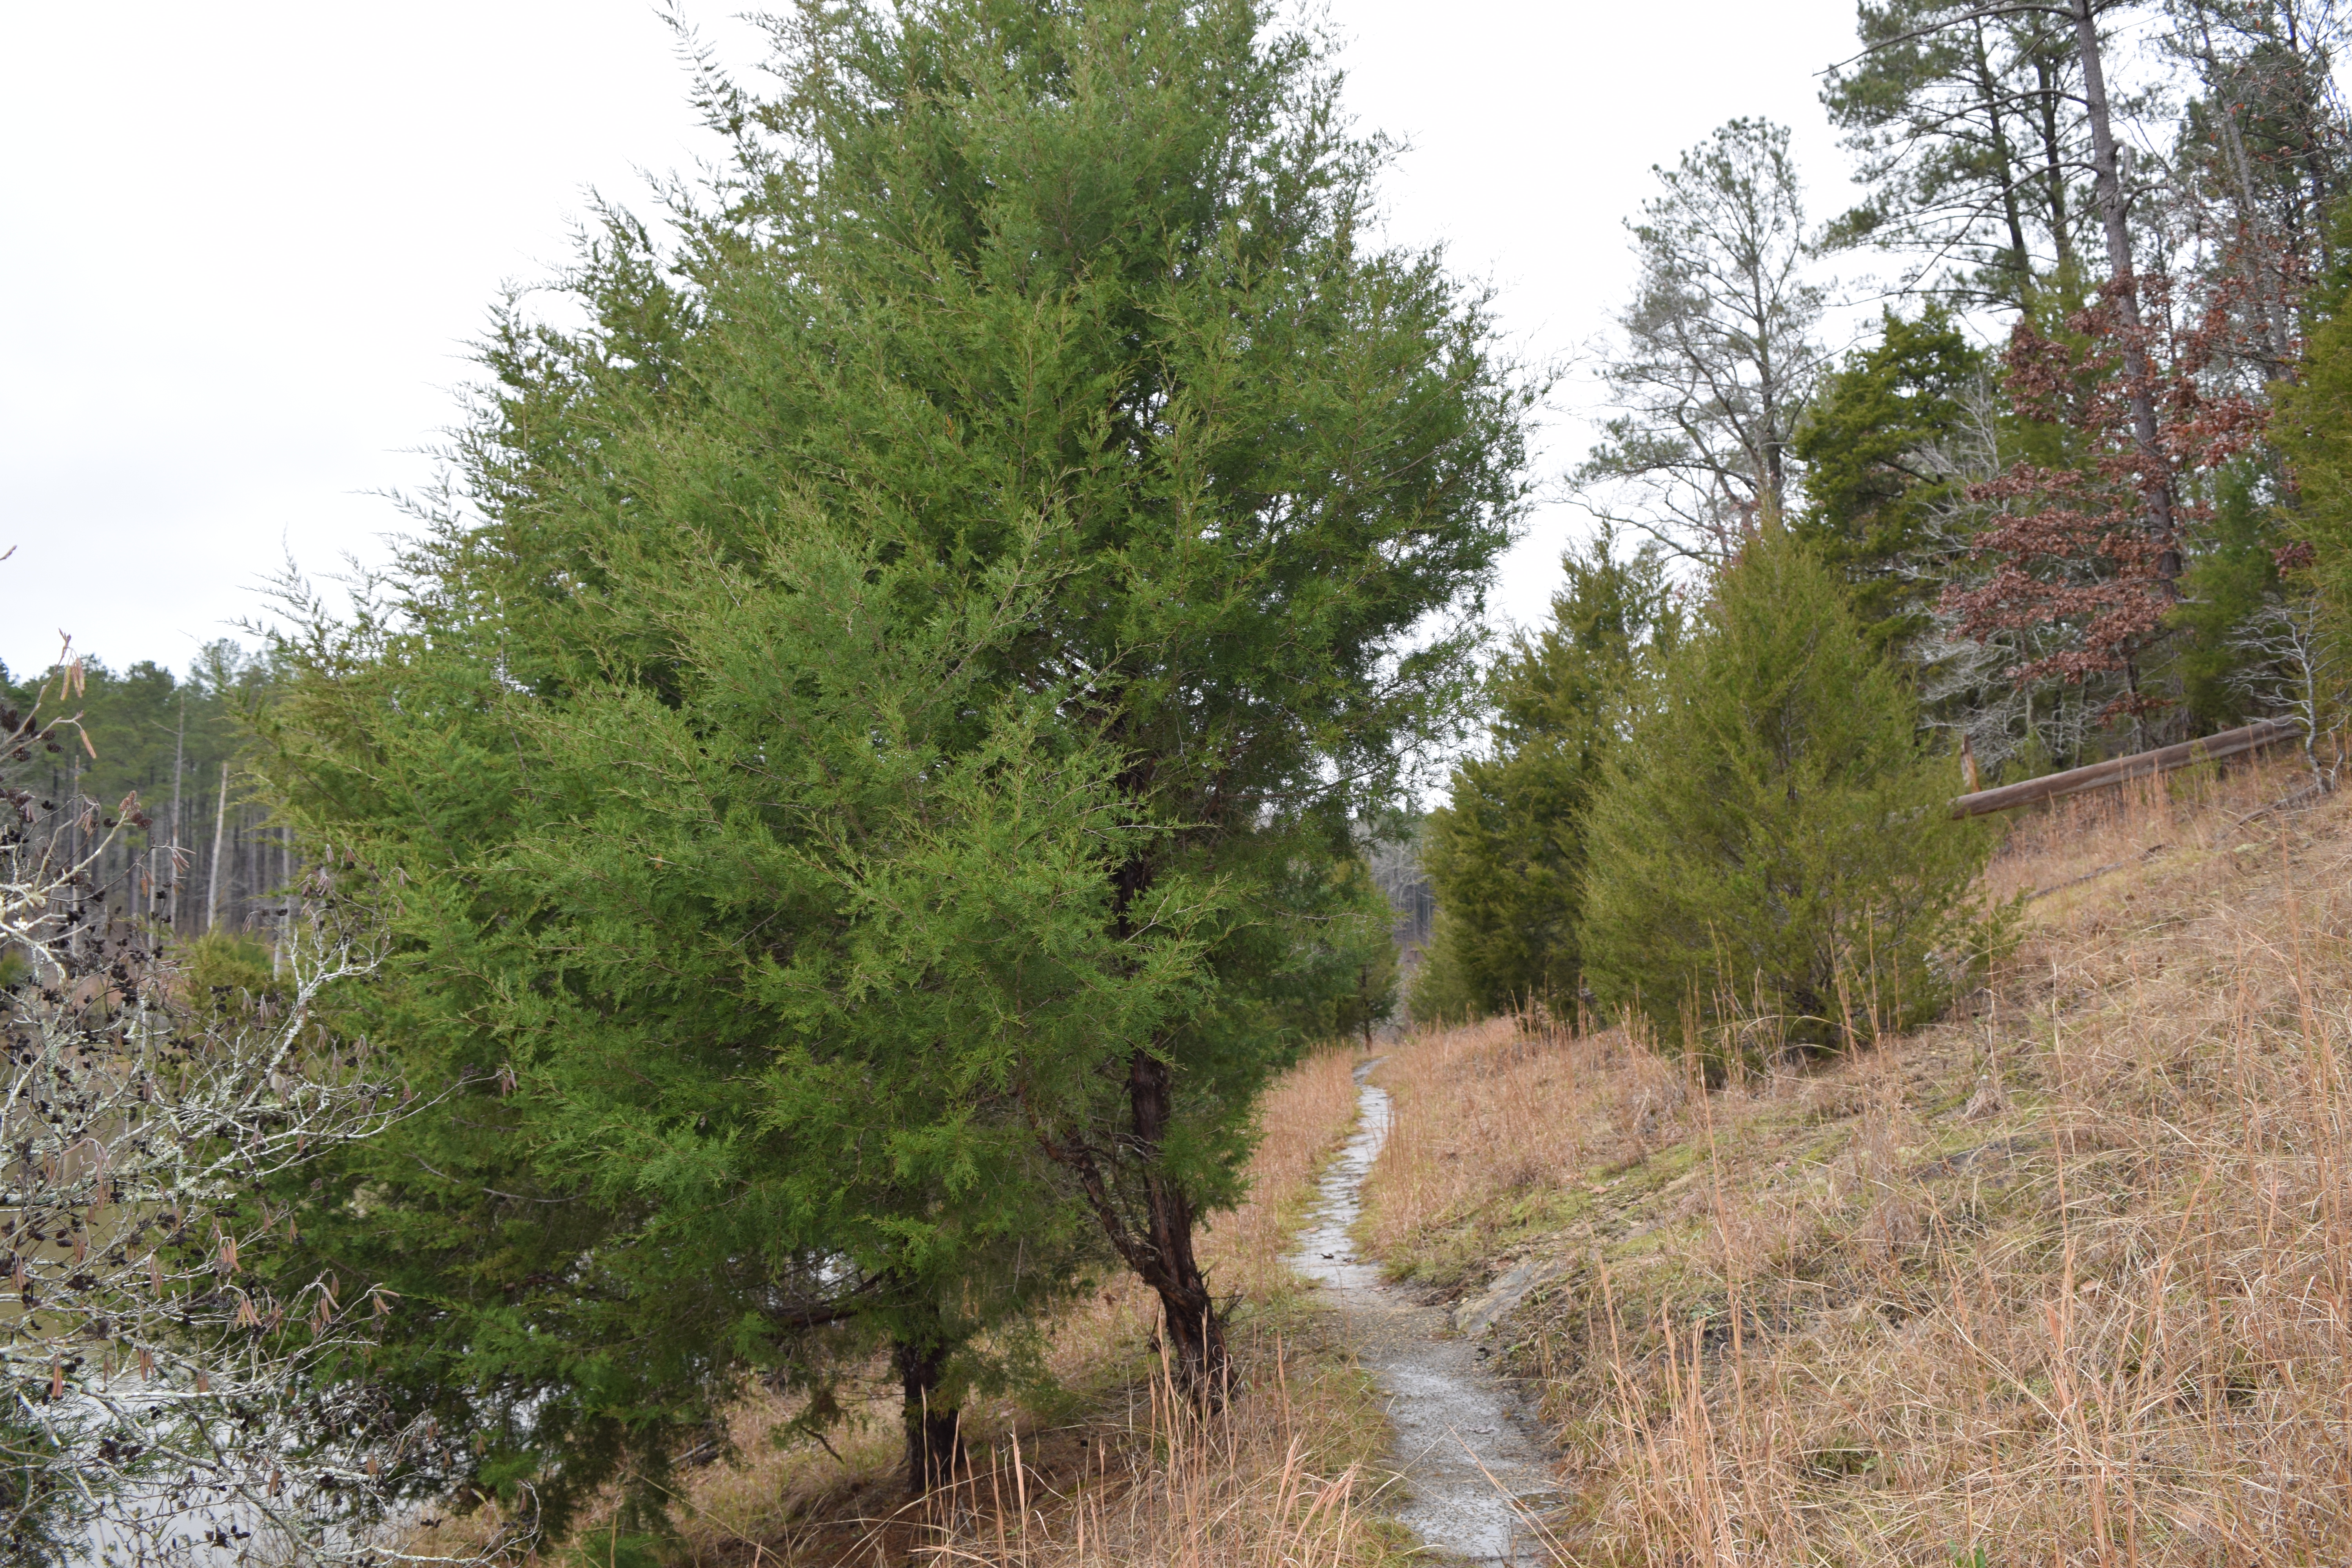 Juniper growing along the Enoree Passage of the Palmetto Trail